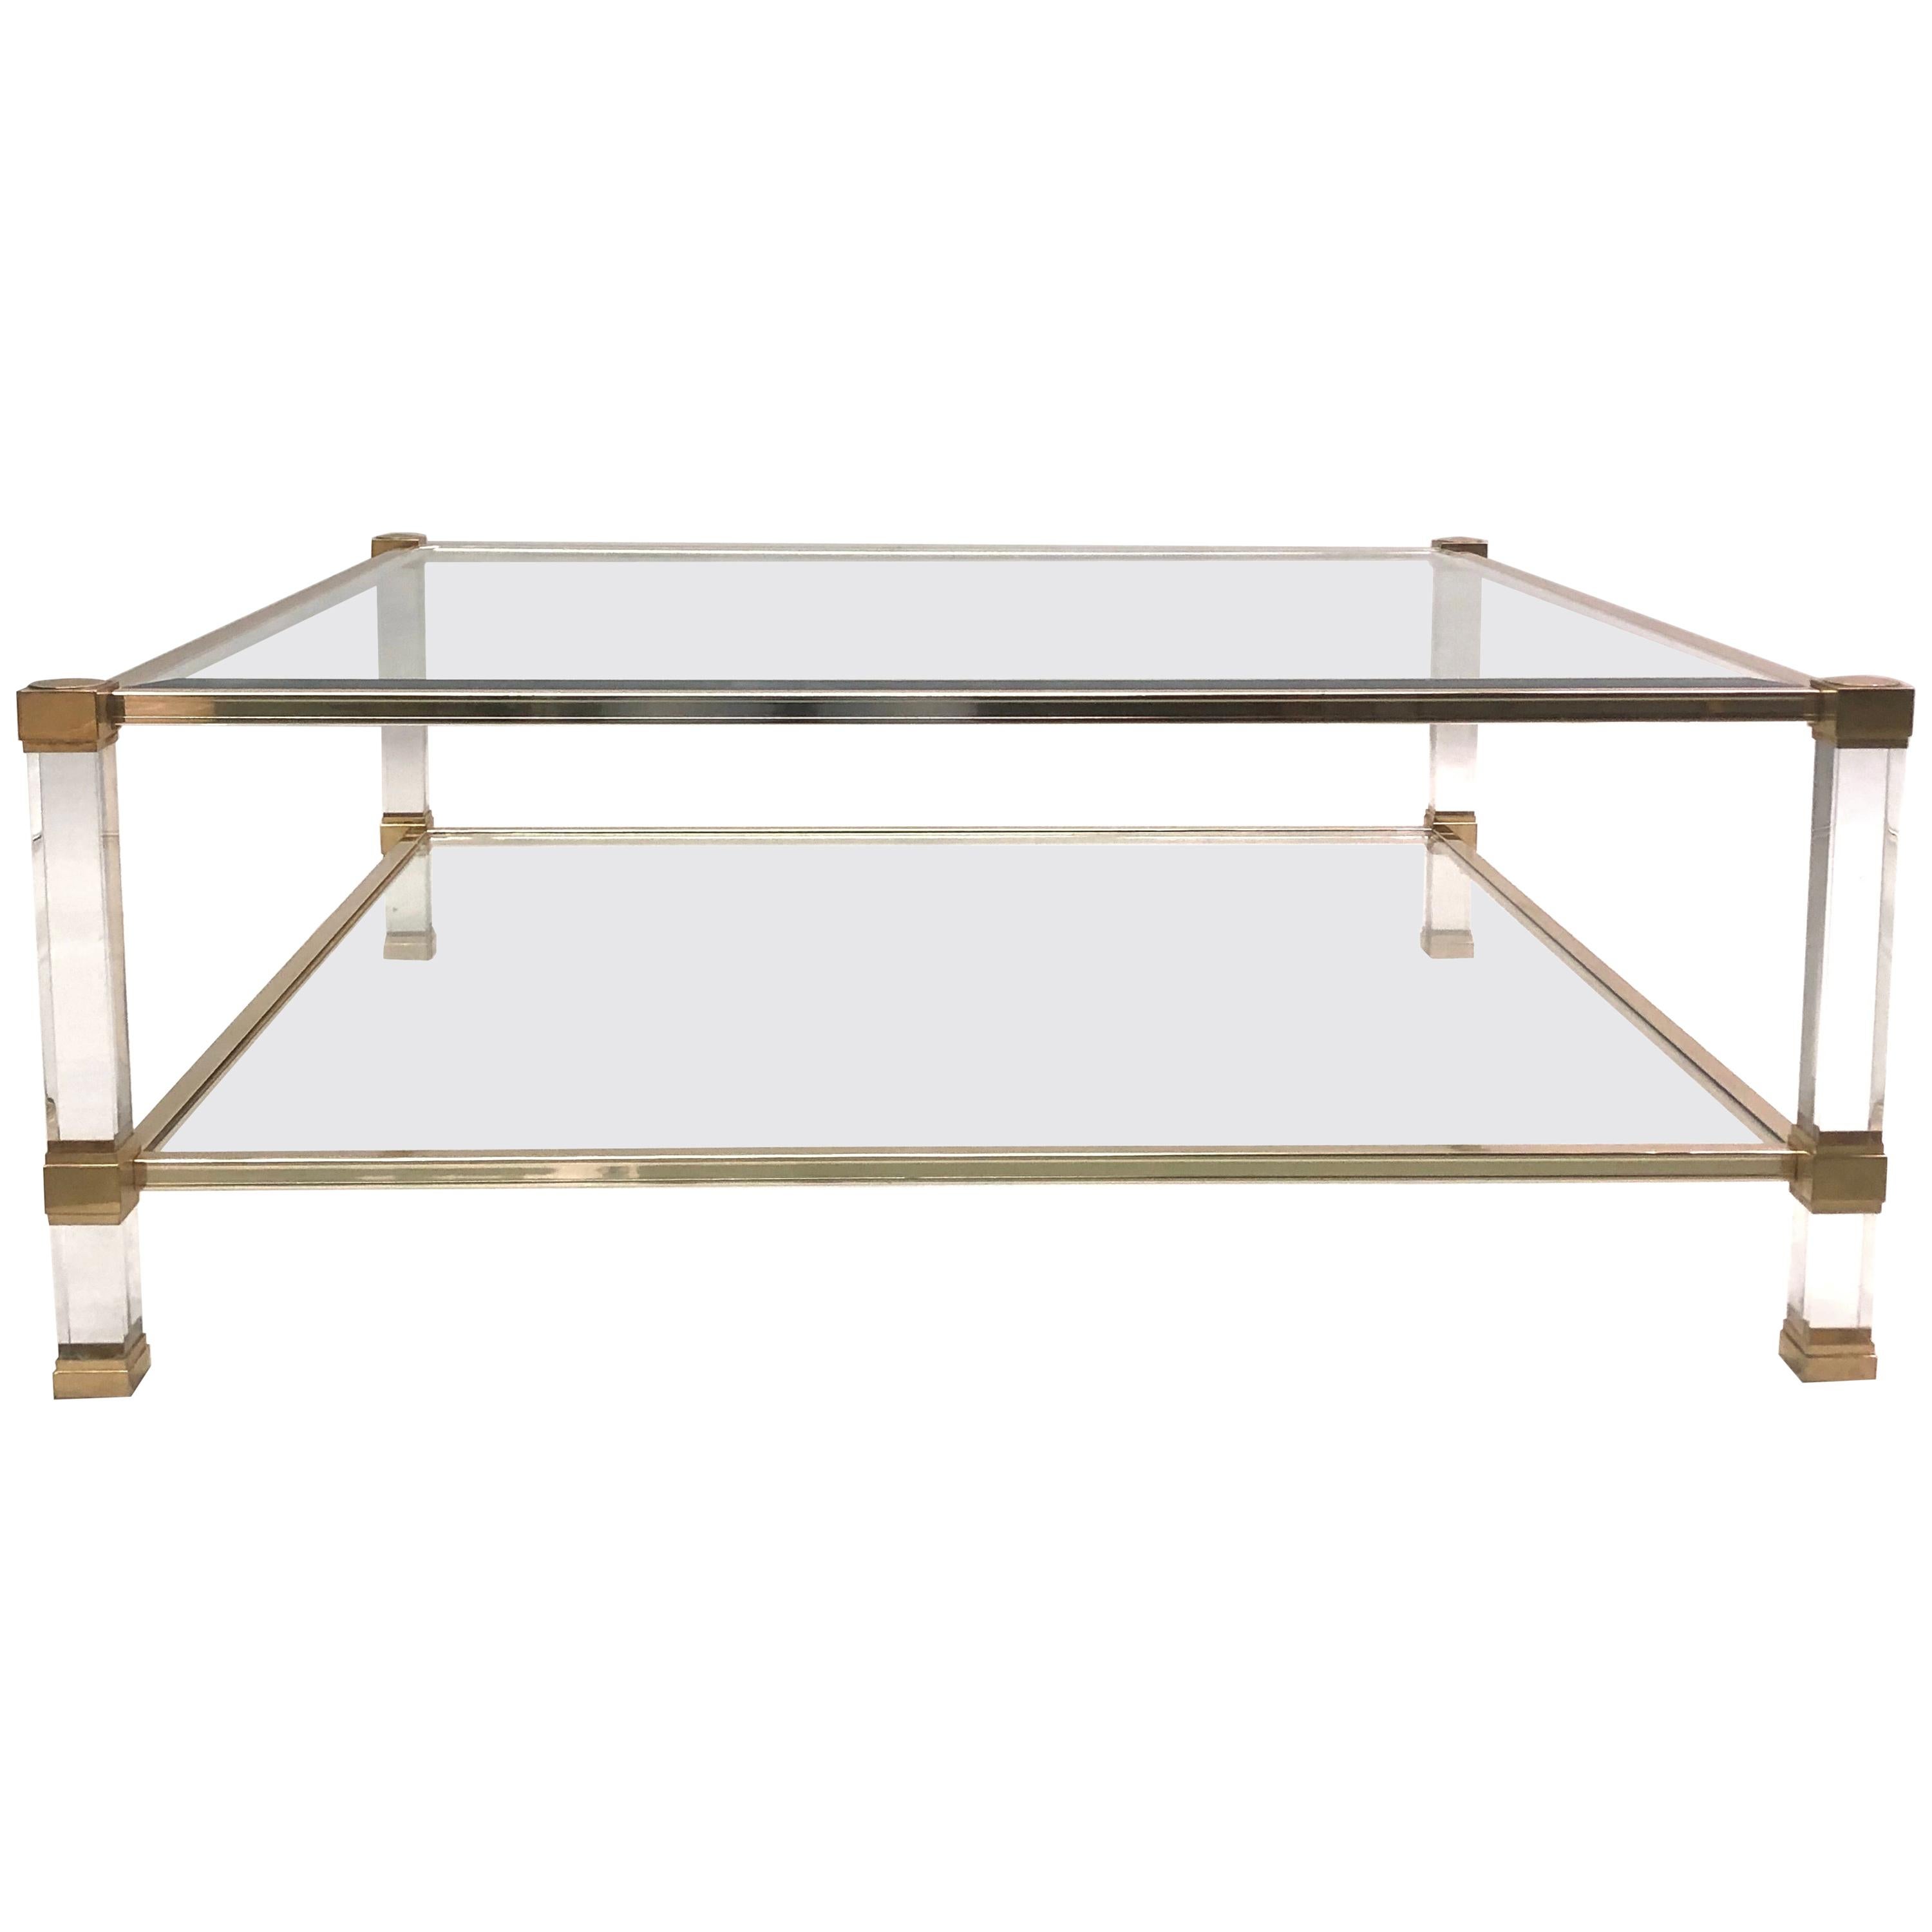 Large Square French Midcentury Double Tier Lucite and Brass Coffee Table, Vandel